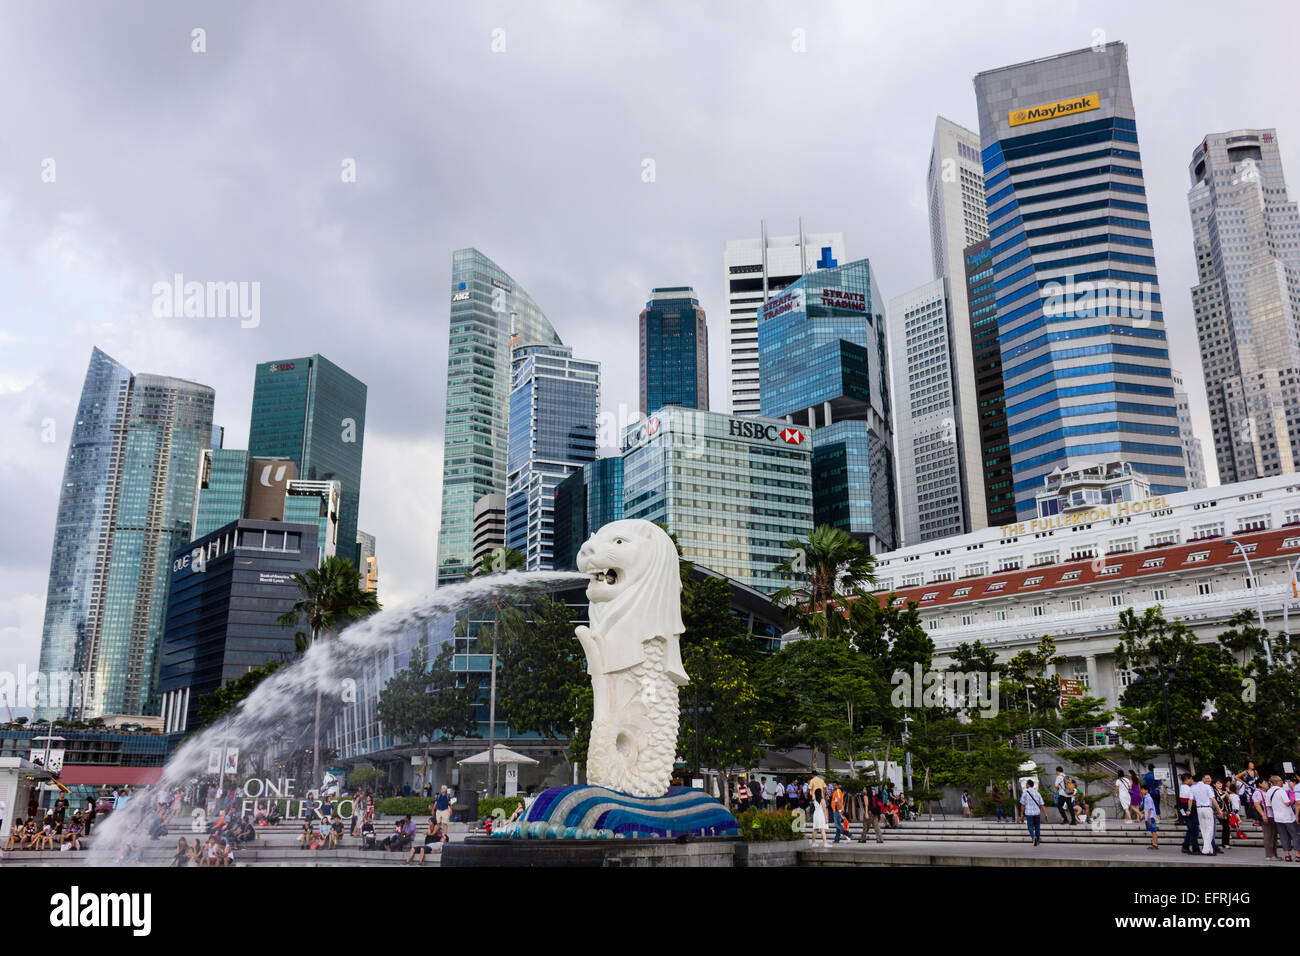 Merlion and High-rise buildings, Singapore Stock Photo